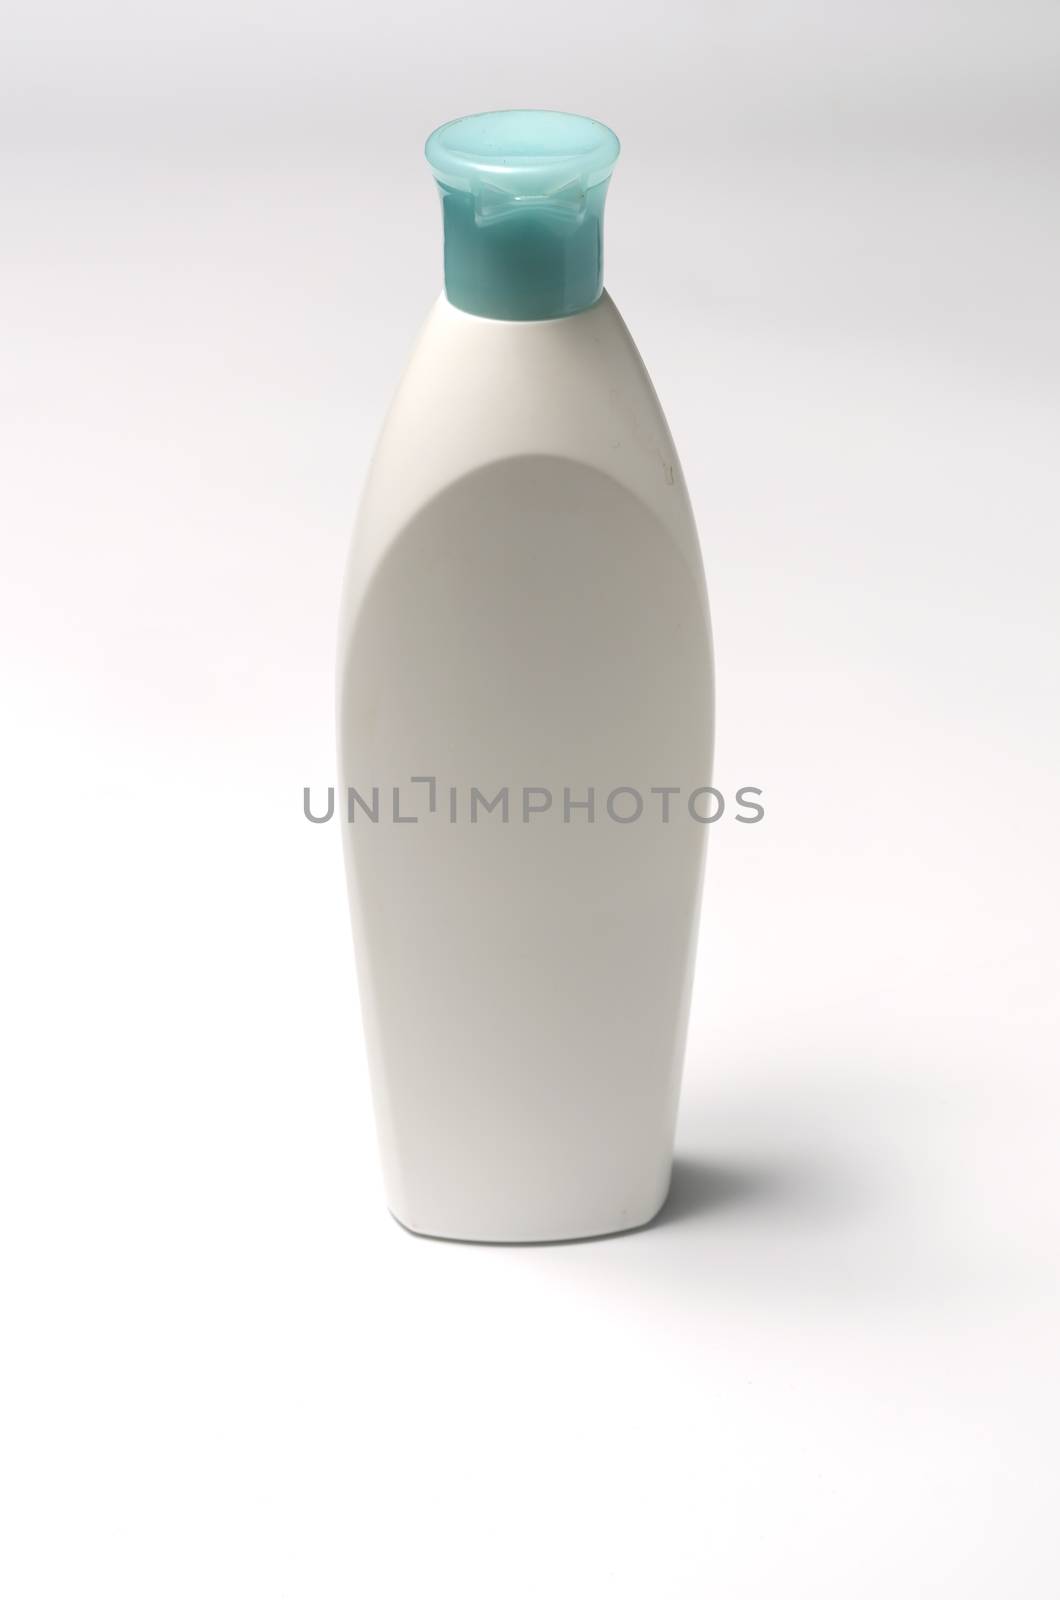 body lotion bottle on a white background